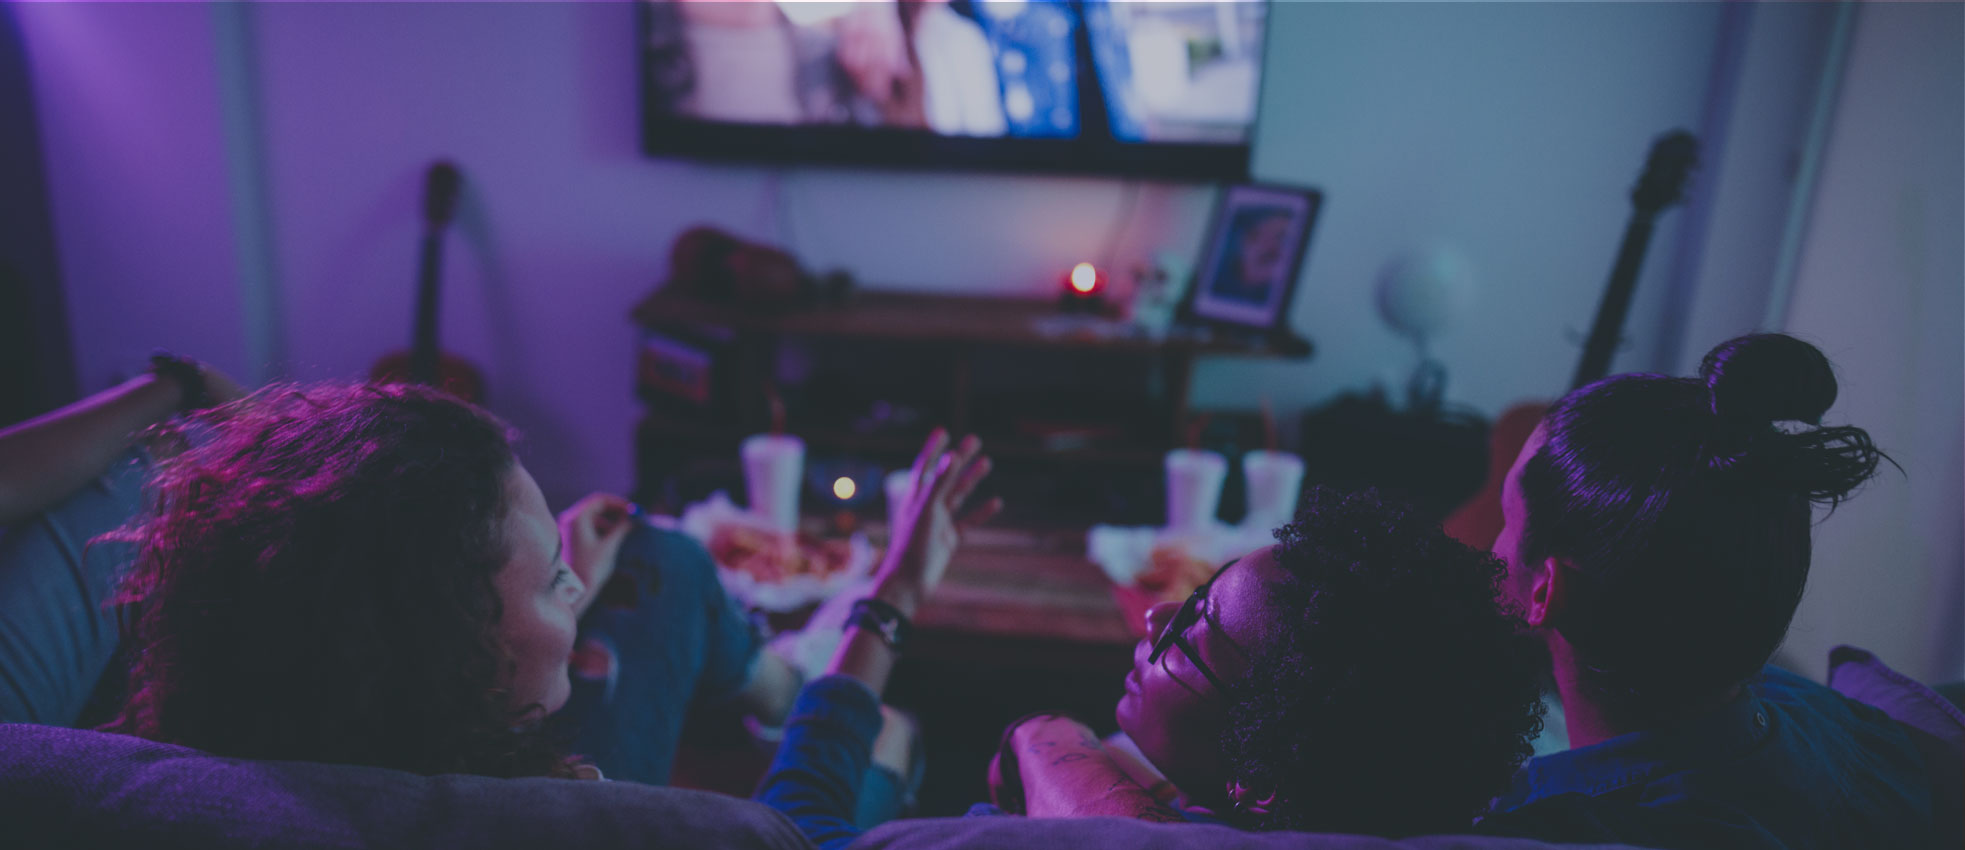 6 TV VIEWING TRENDS IN SUB-SAHARA AFRICA